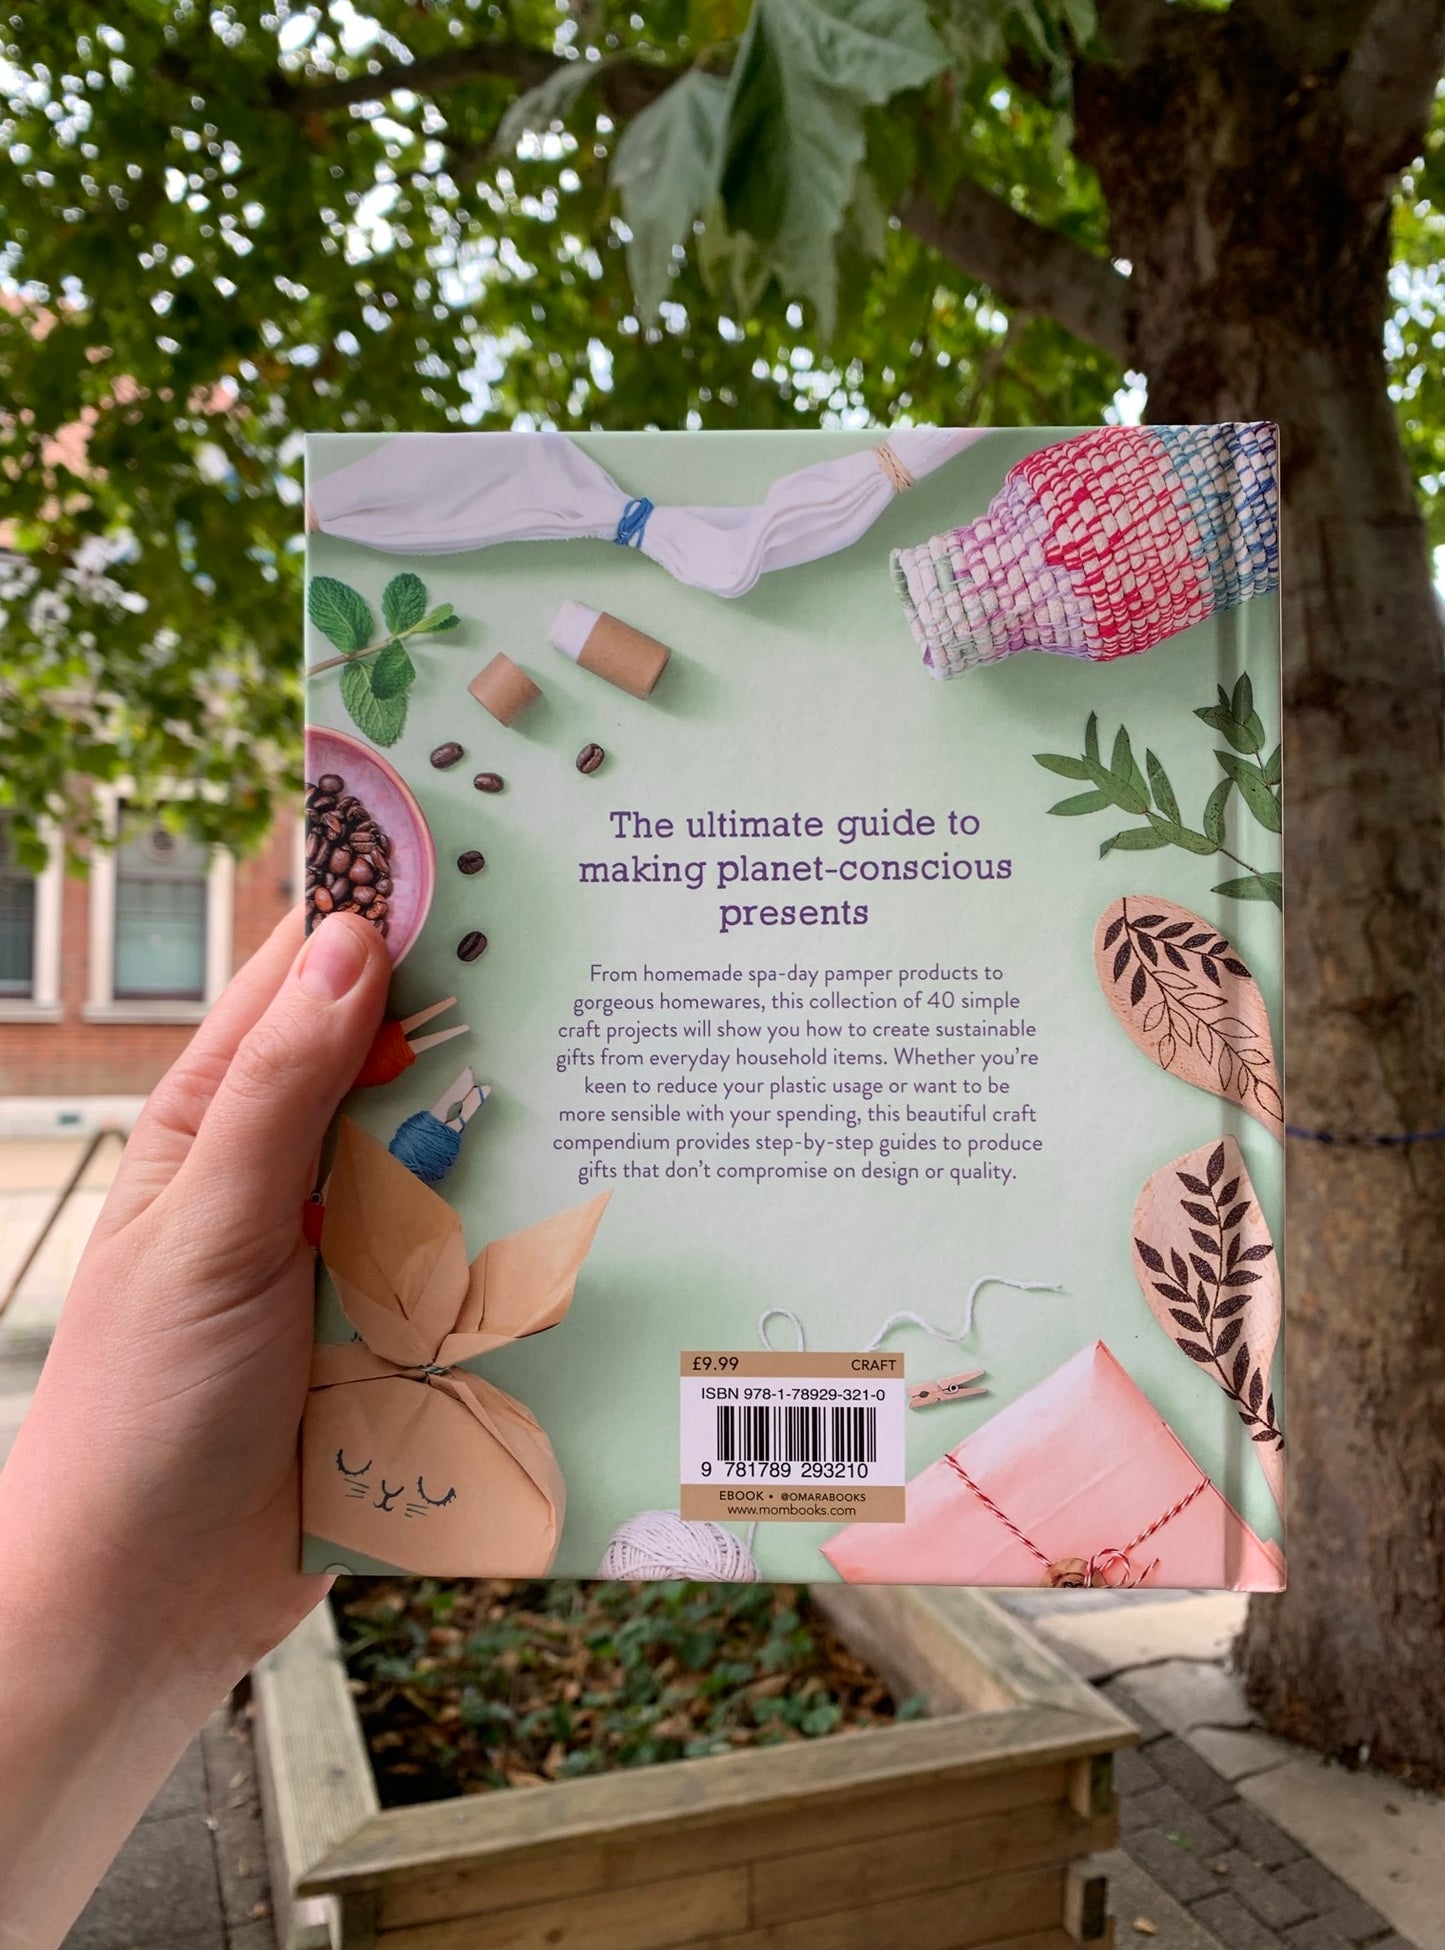 ‘Green Gifts’ by Rosie James & Claire Cater